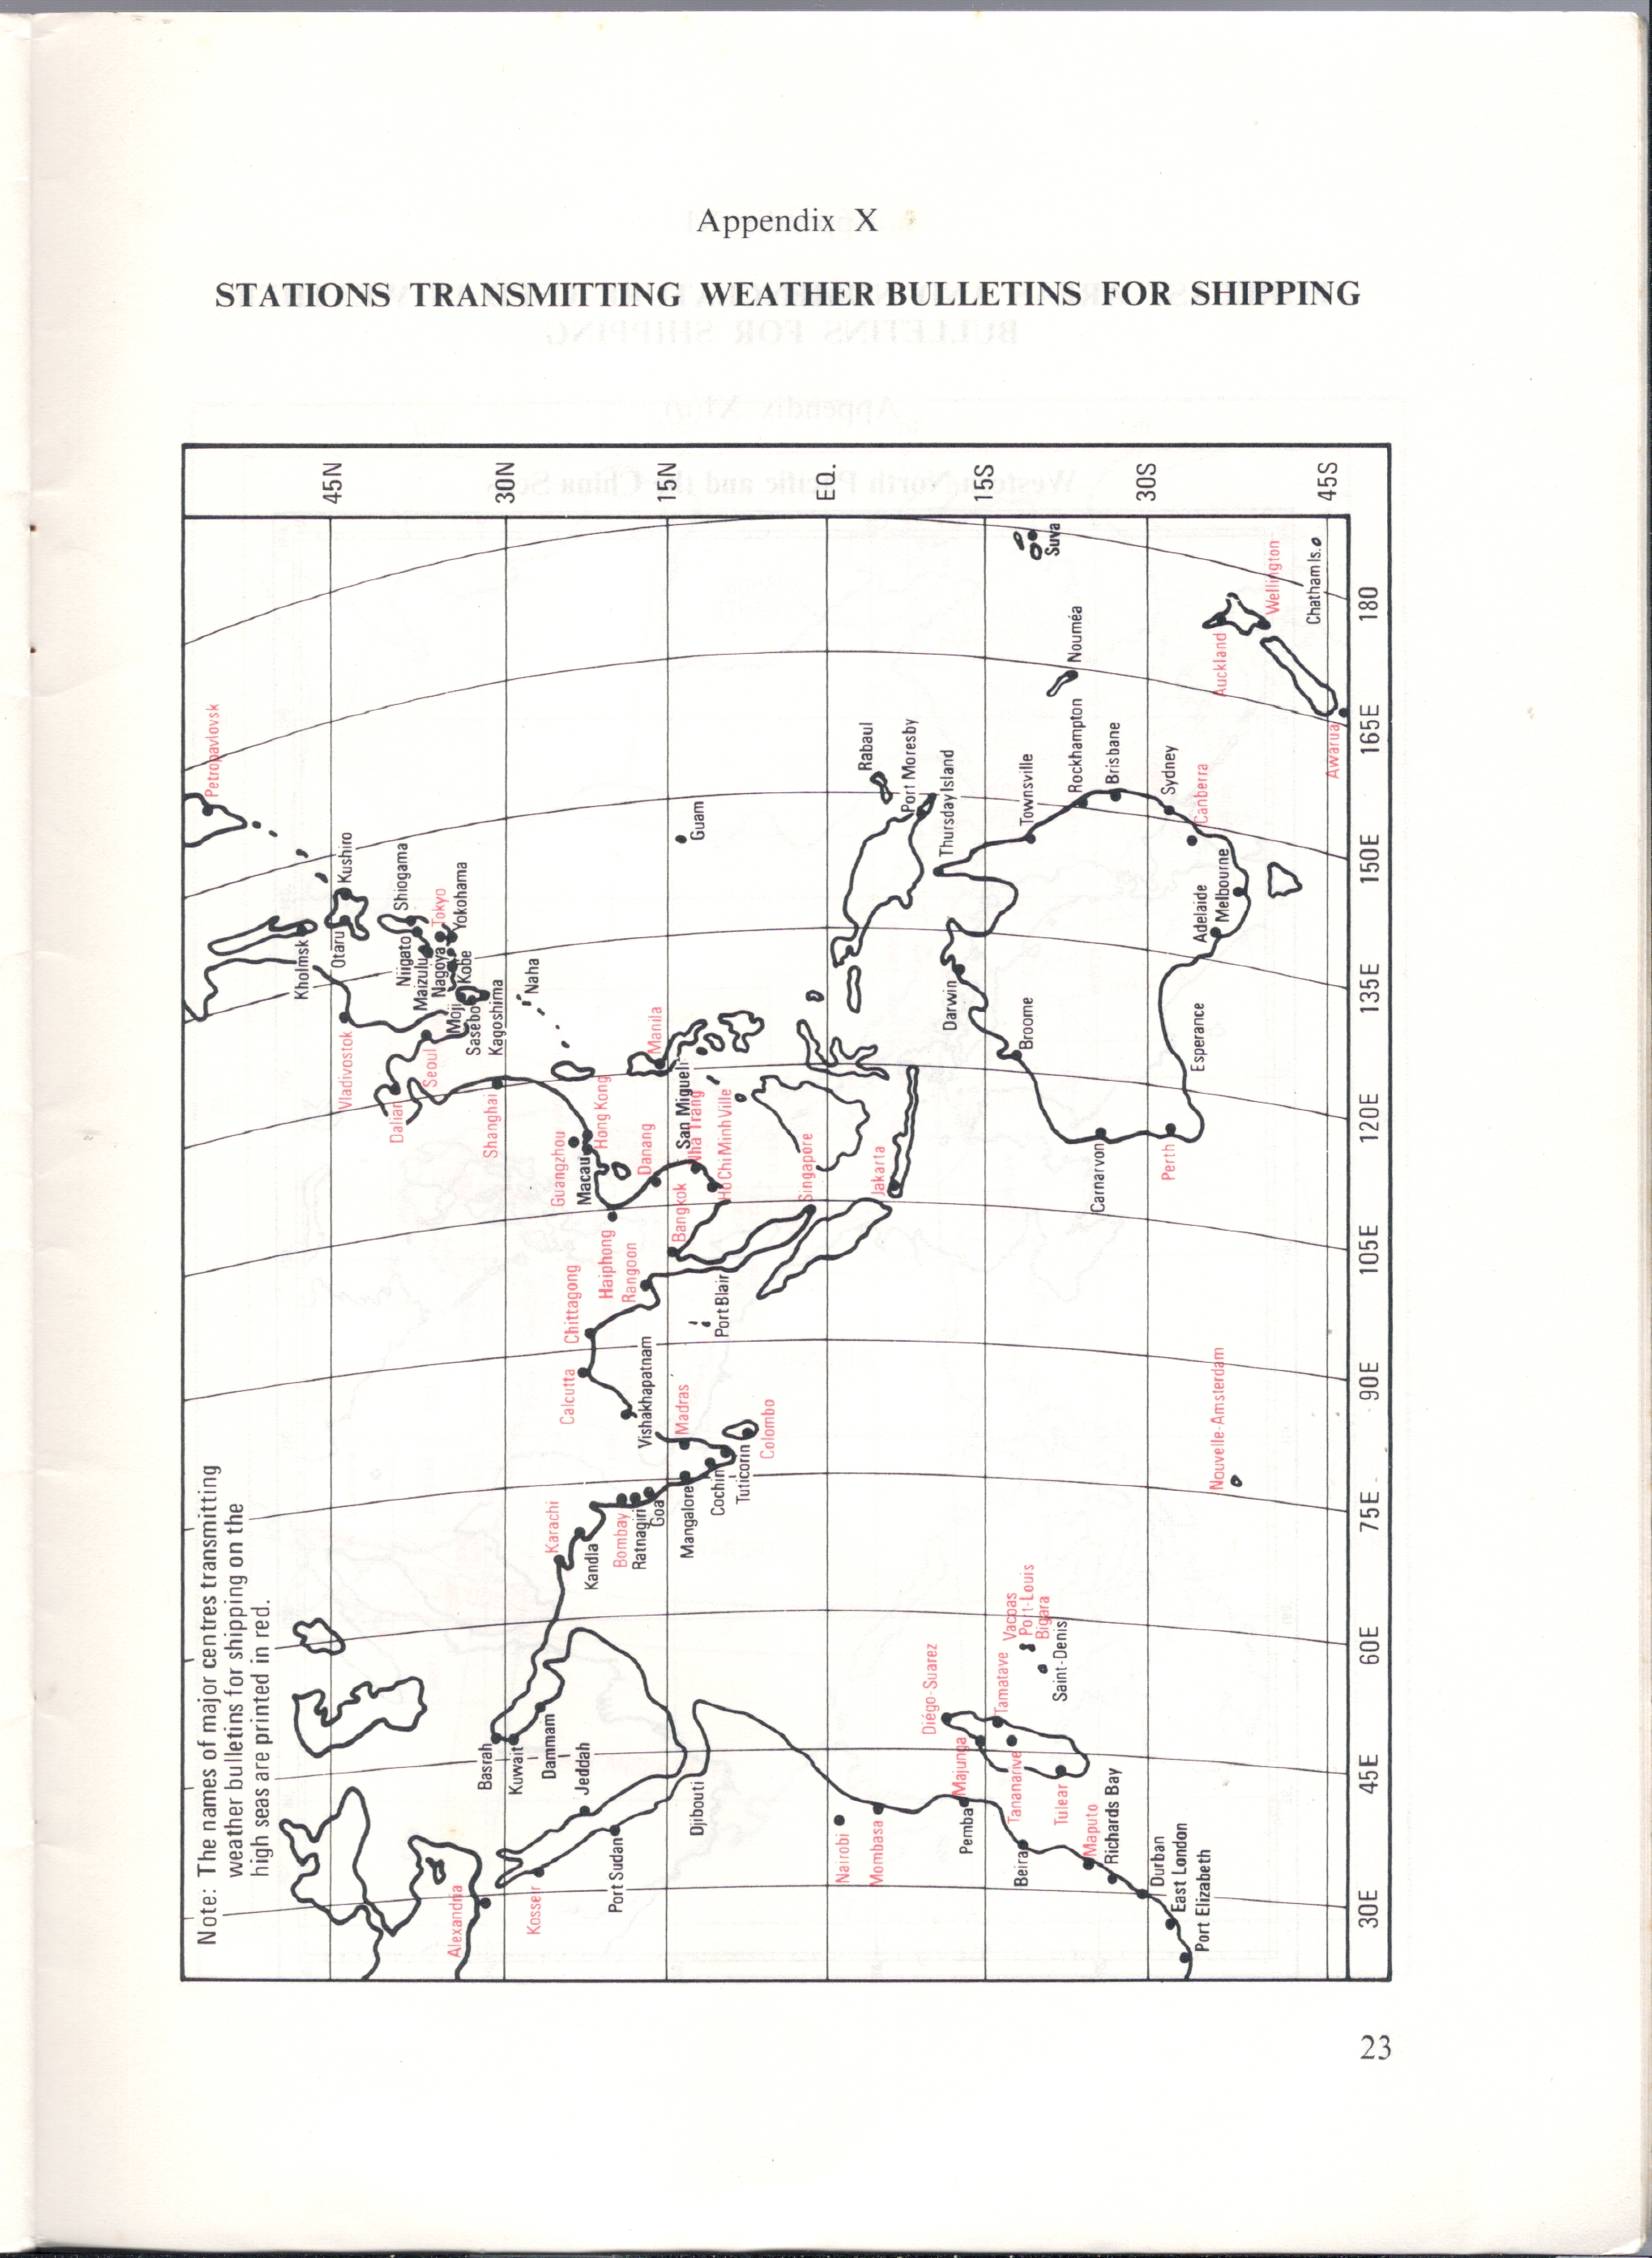 HONG KONG  WEATHER SERVICES FOR SHIPPING 1984 - 23.JPG